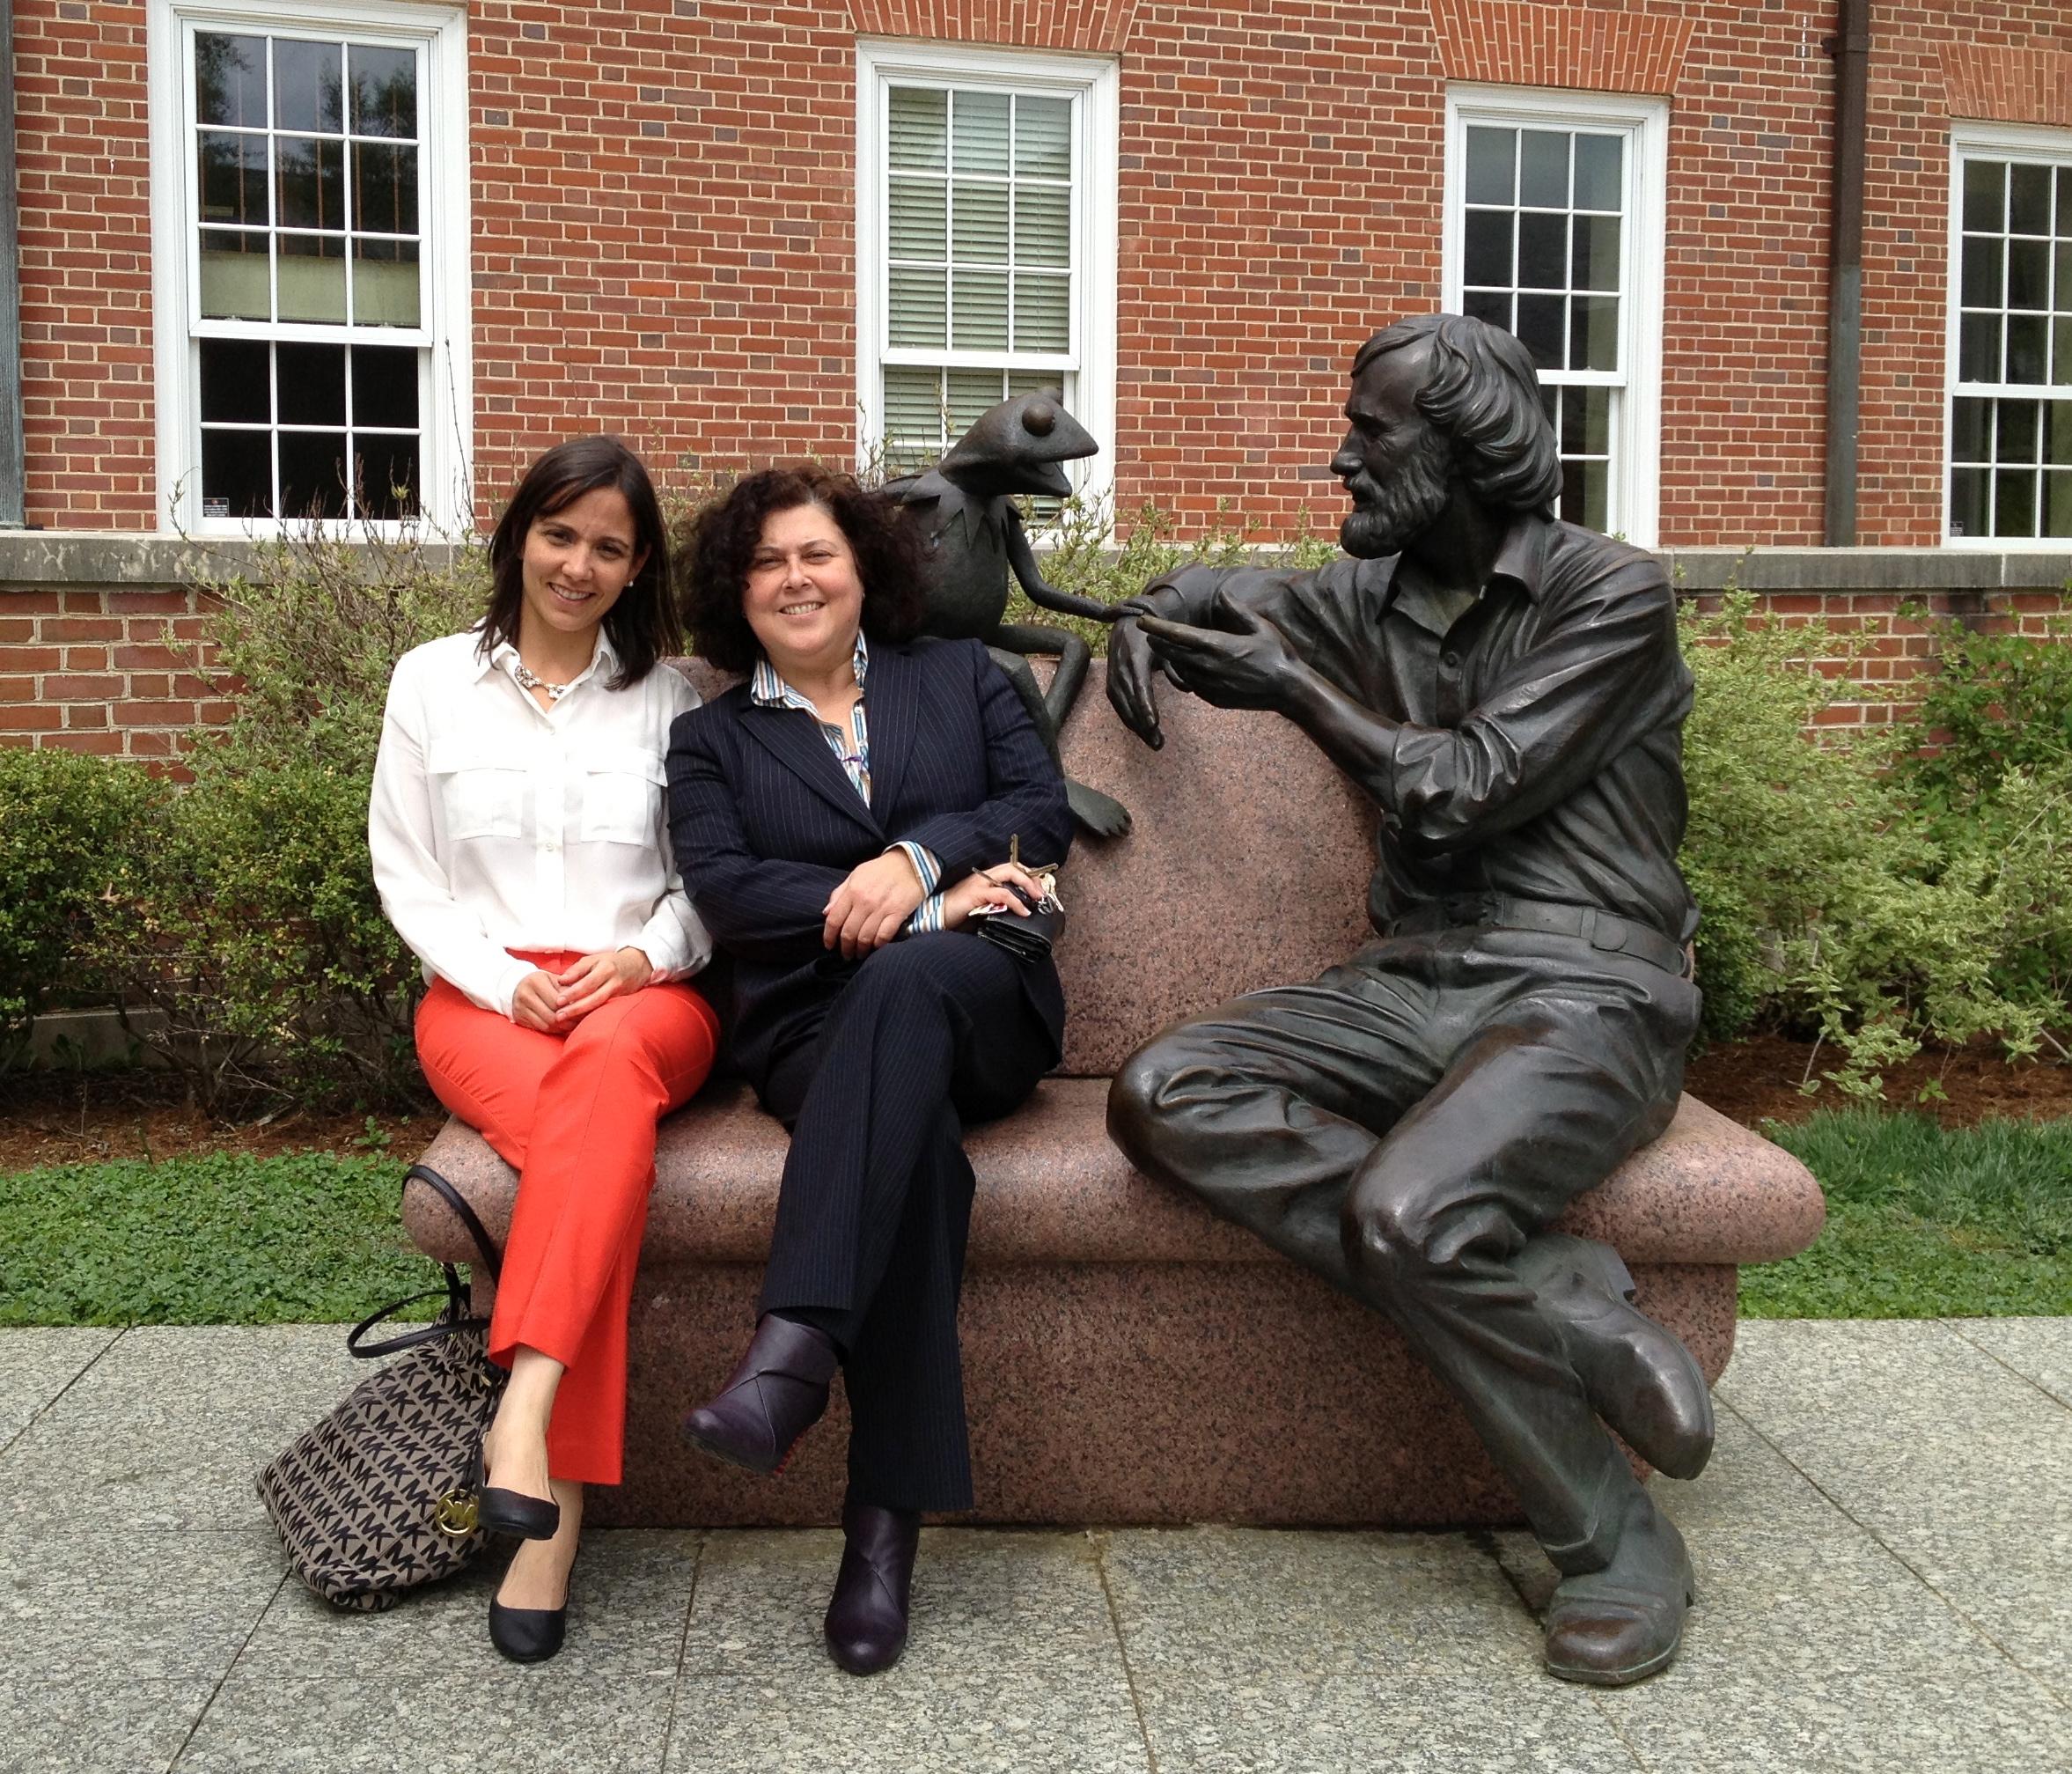 Rebeca Moreno poses next to her mentor Dr. Eyda M. Merediz by the Jim Henson statue on campus.